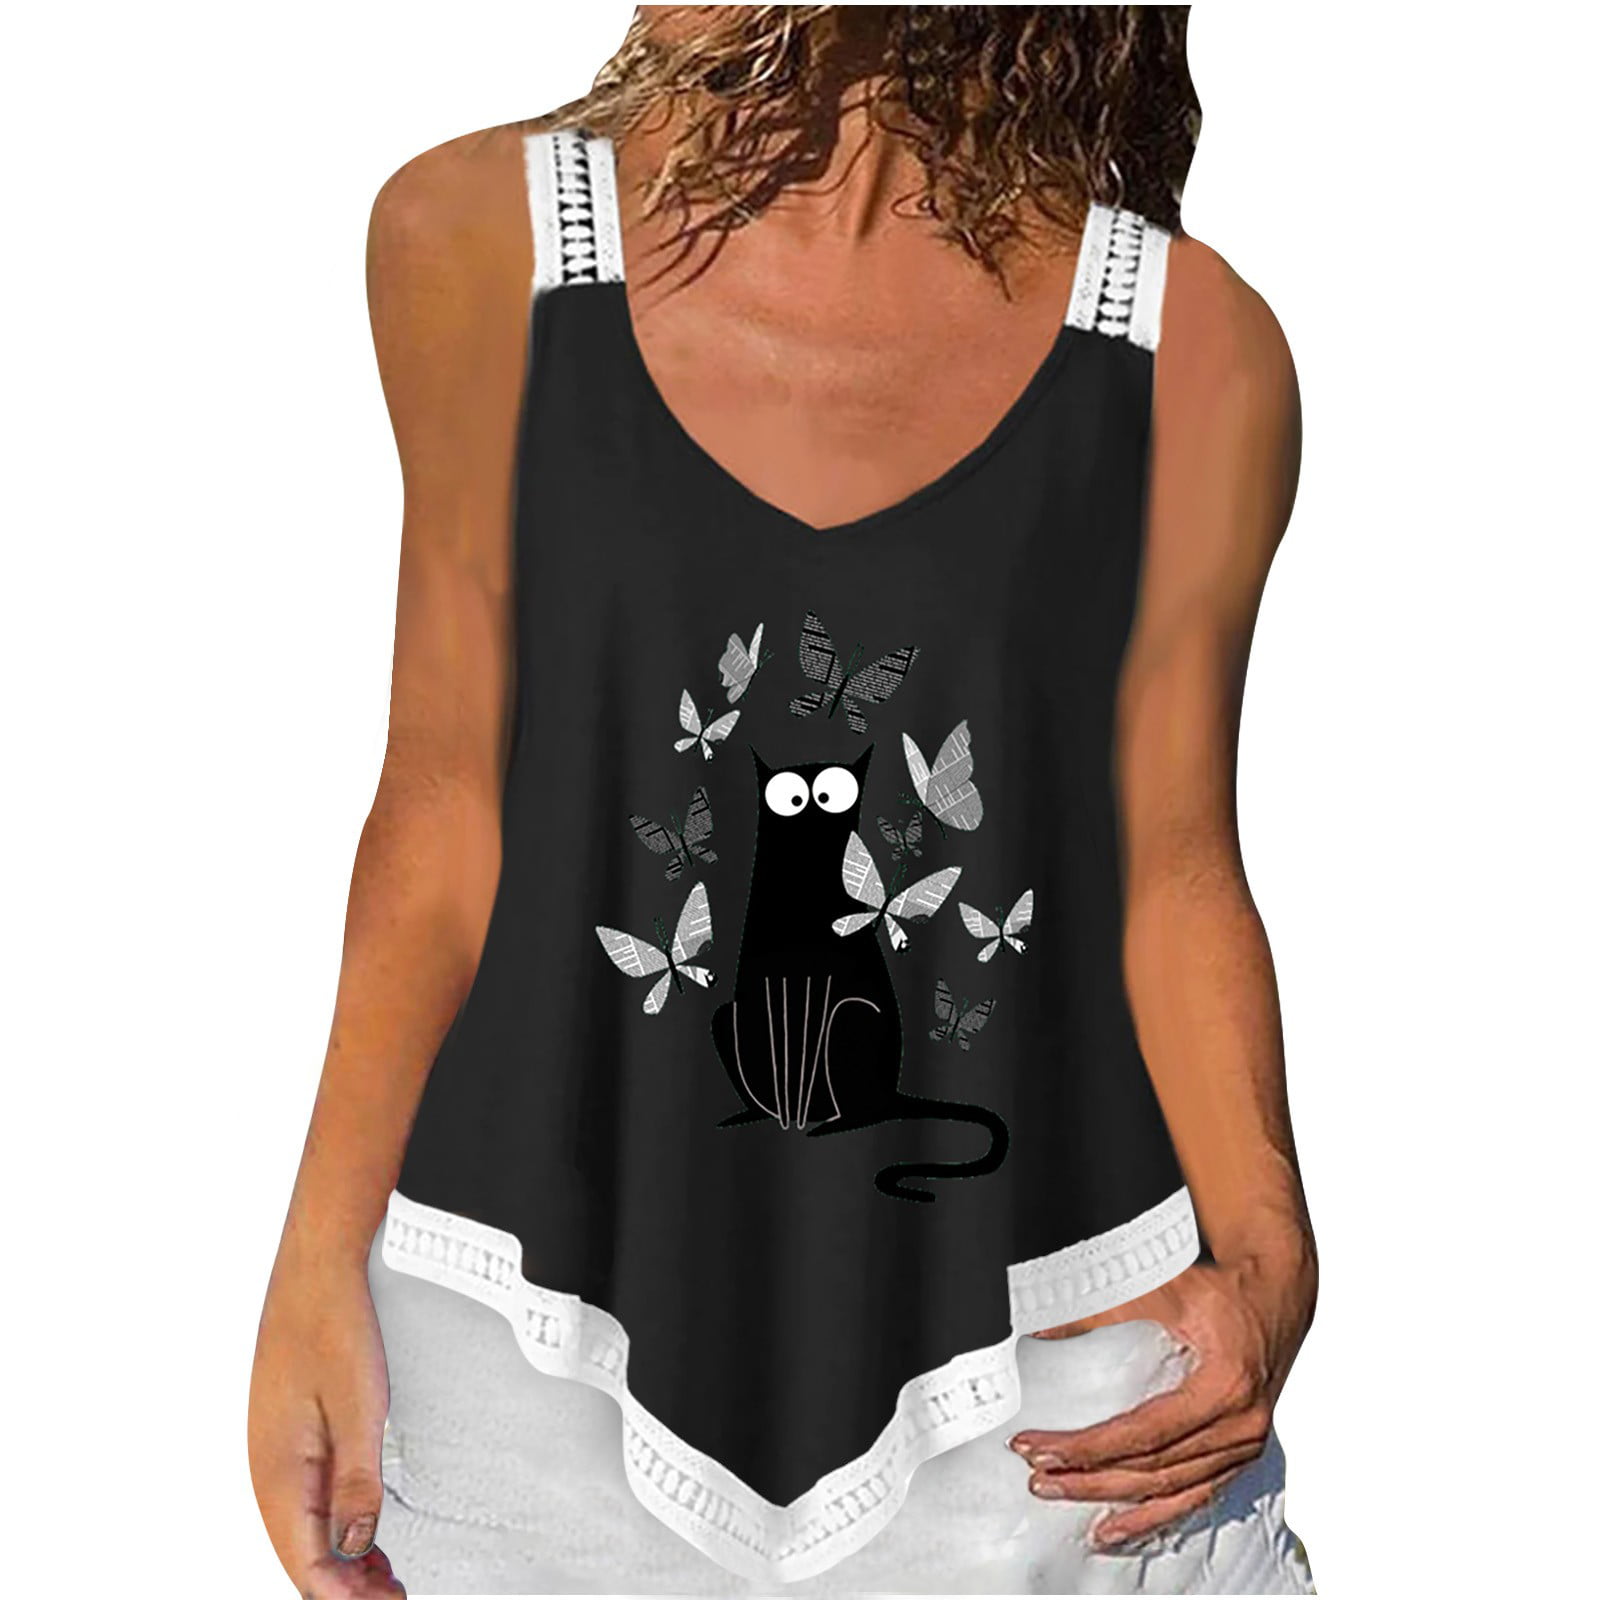 Womens Tunic Tank Tops,SMALLE◕‿◕ Womens Summer Sleeveless Feather Tank Tops Casual Graphic Tee Yoga Loose Fit Tank Tops 